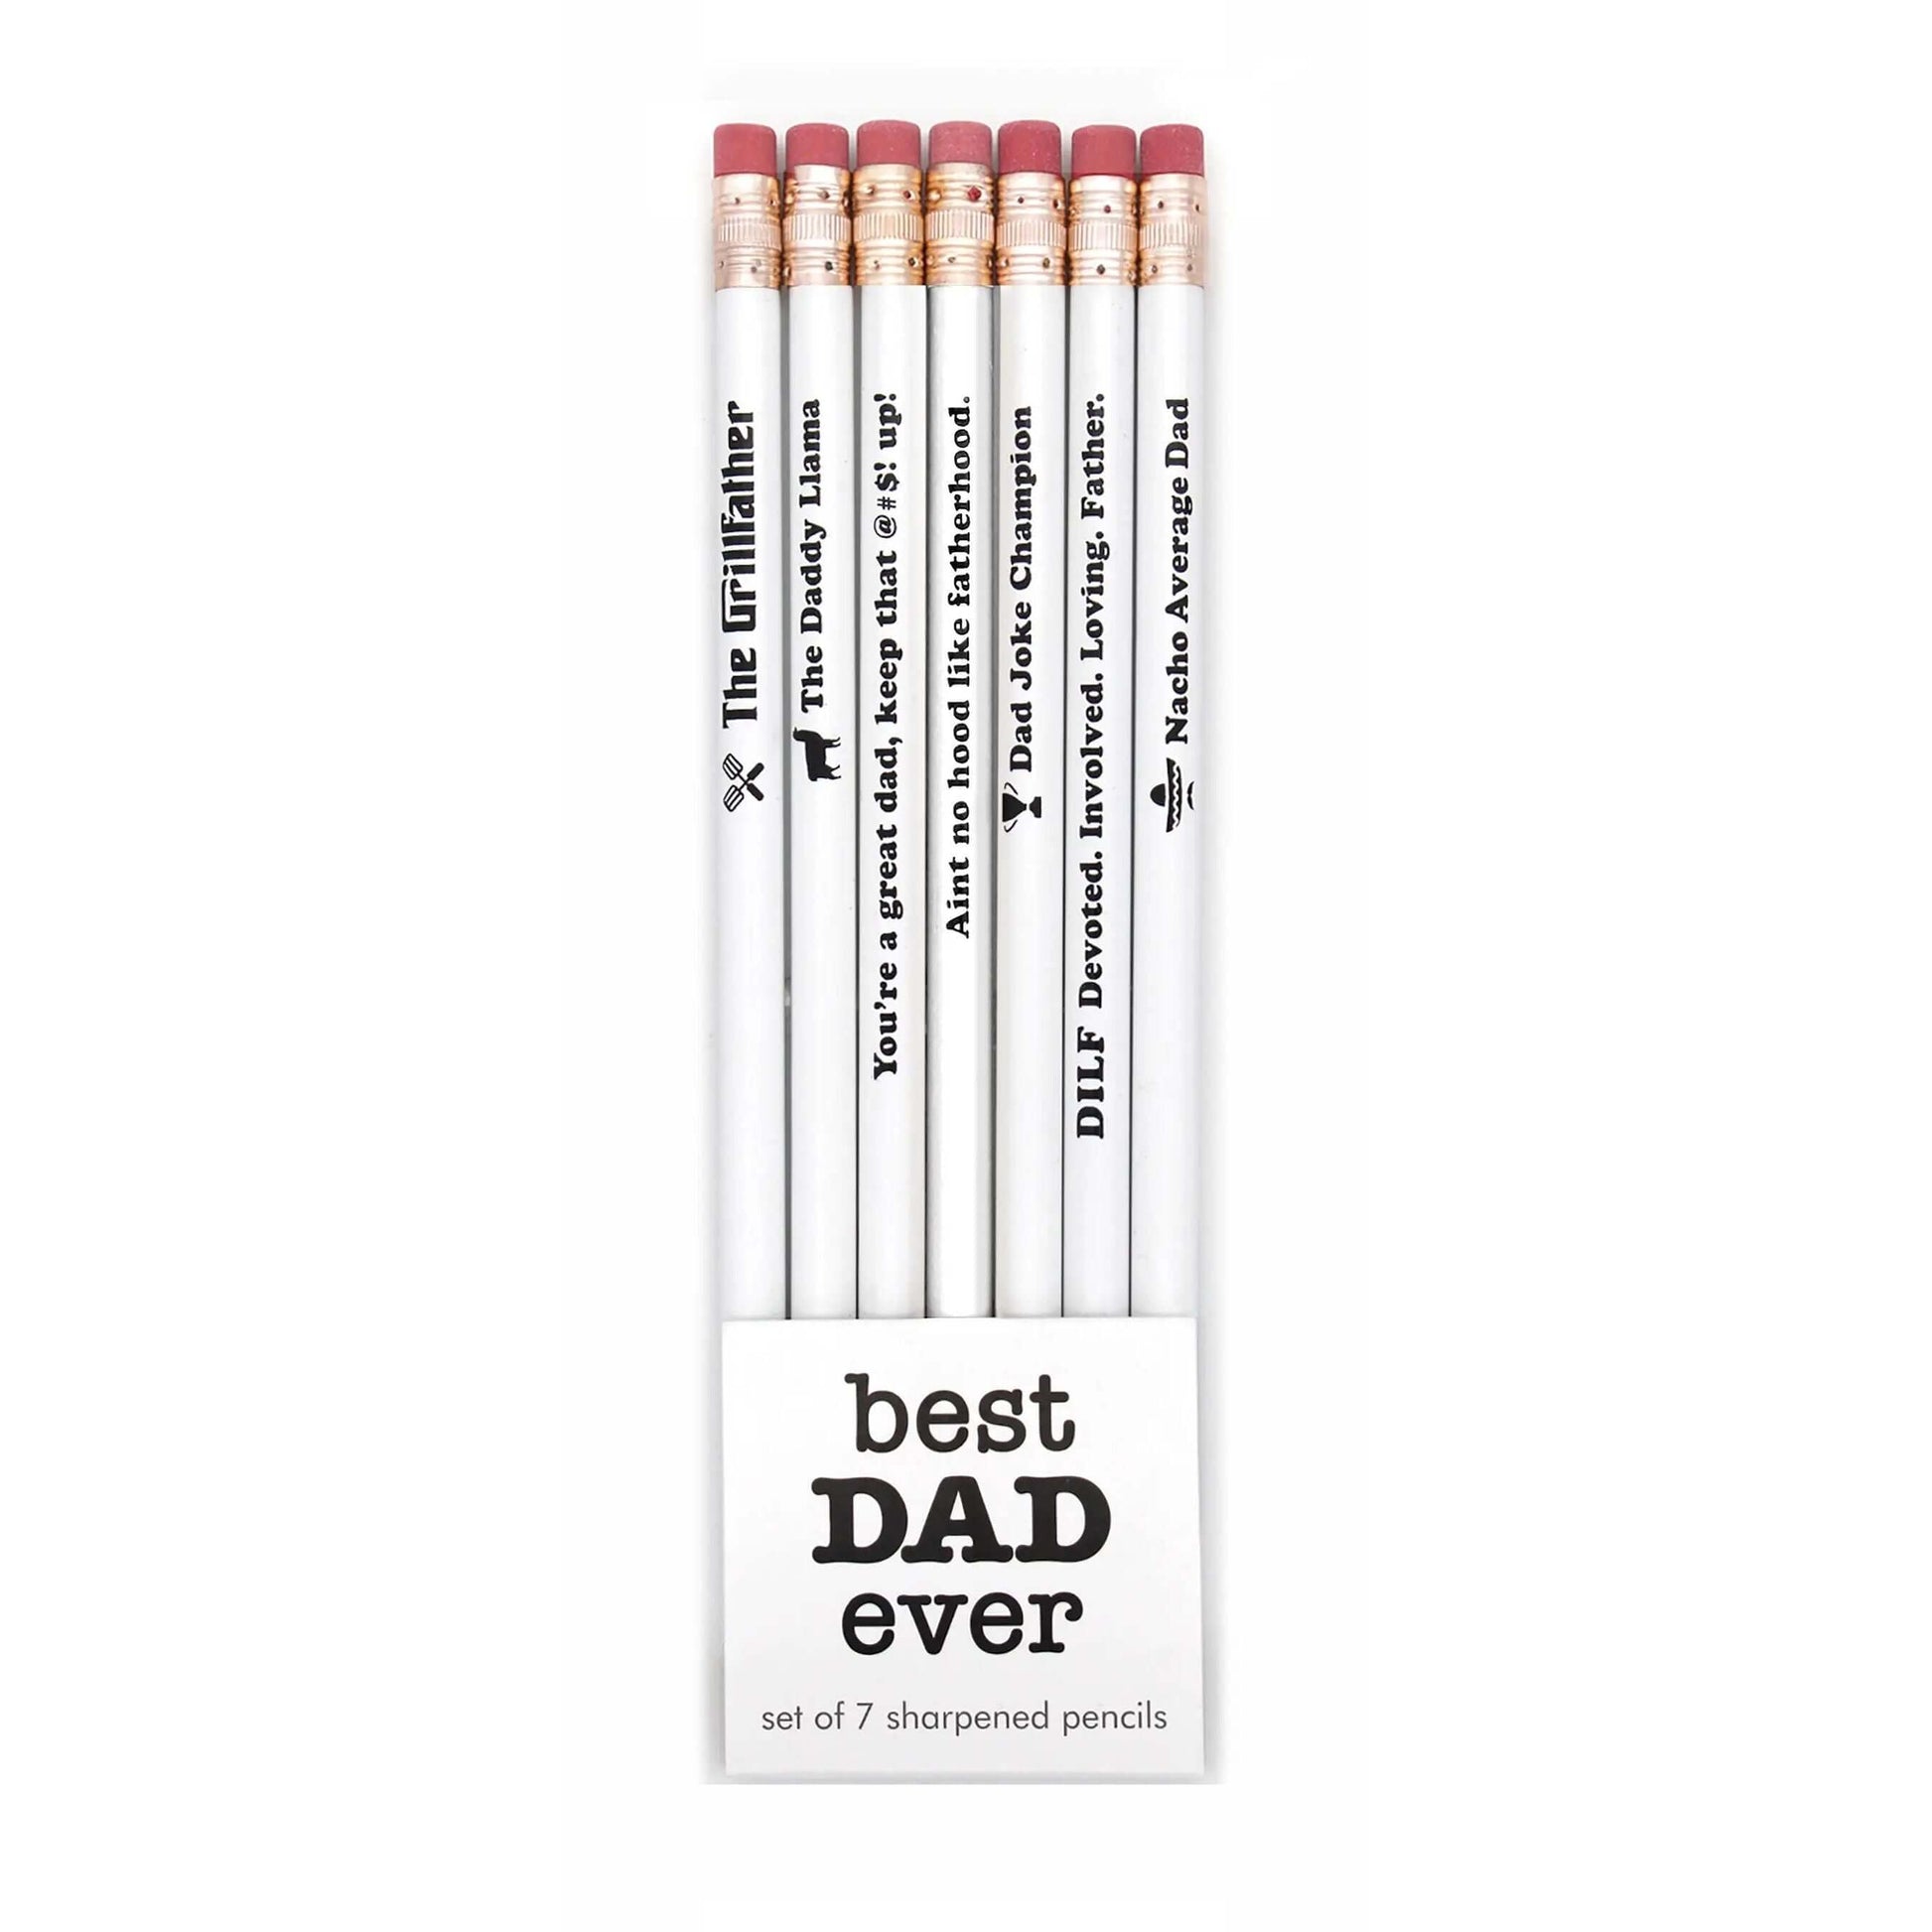 Snifty Funny Best Dad Ever Pencil Set, Pencil Sets for £4.75